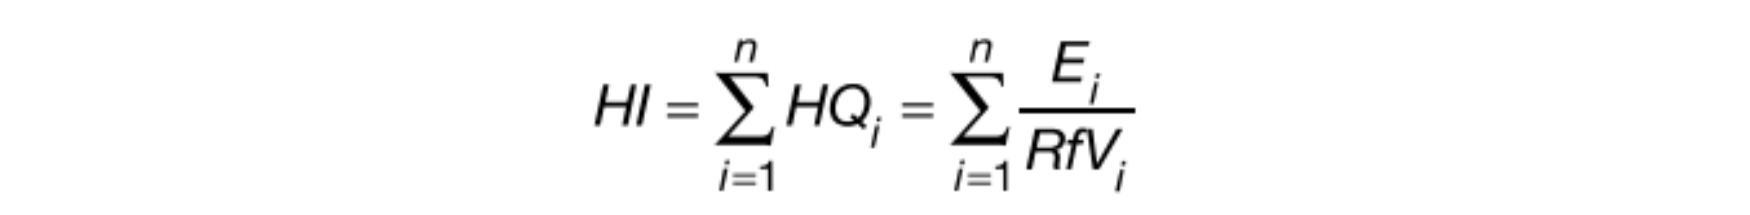 EPA’s equation for calculating the HI from any given sample